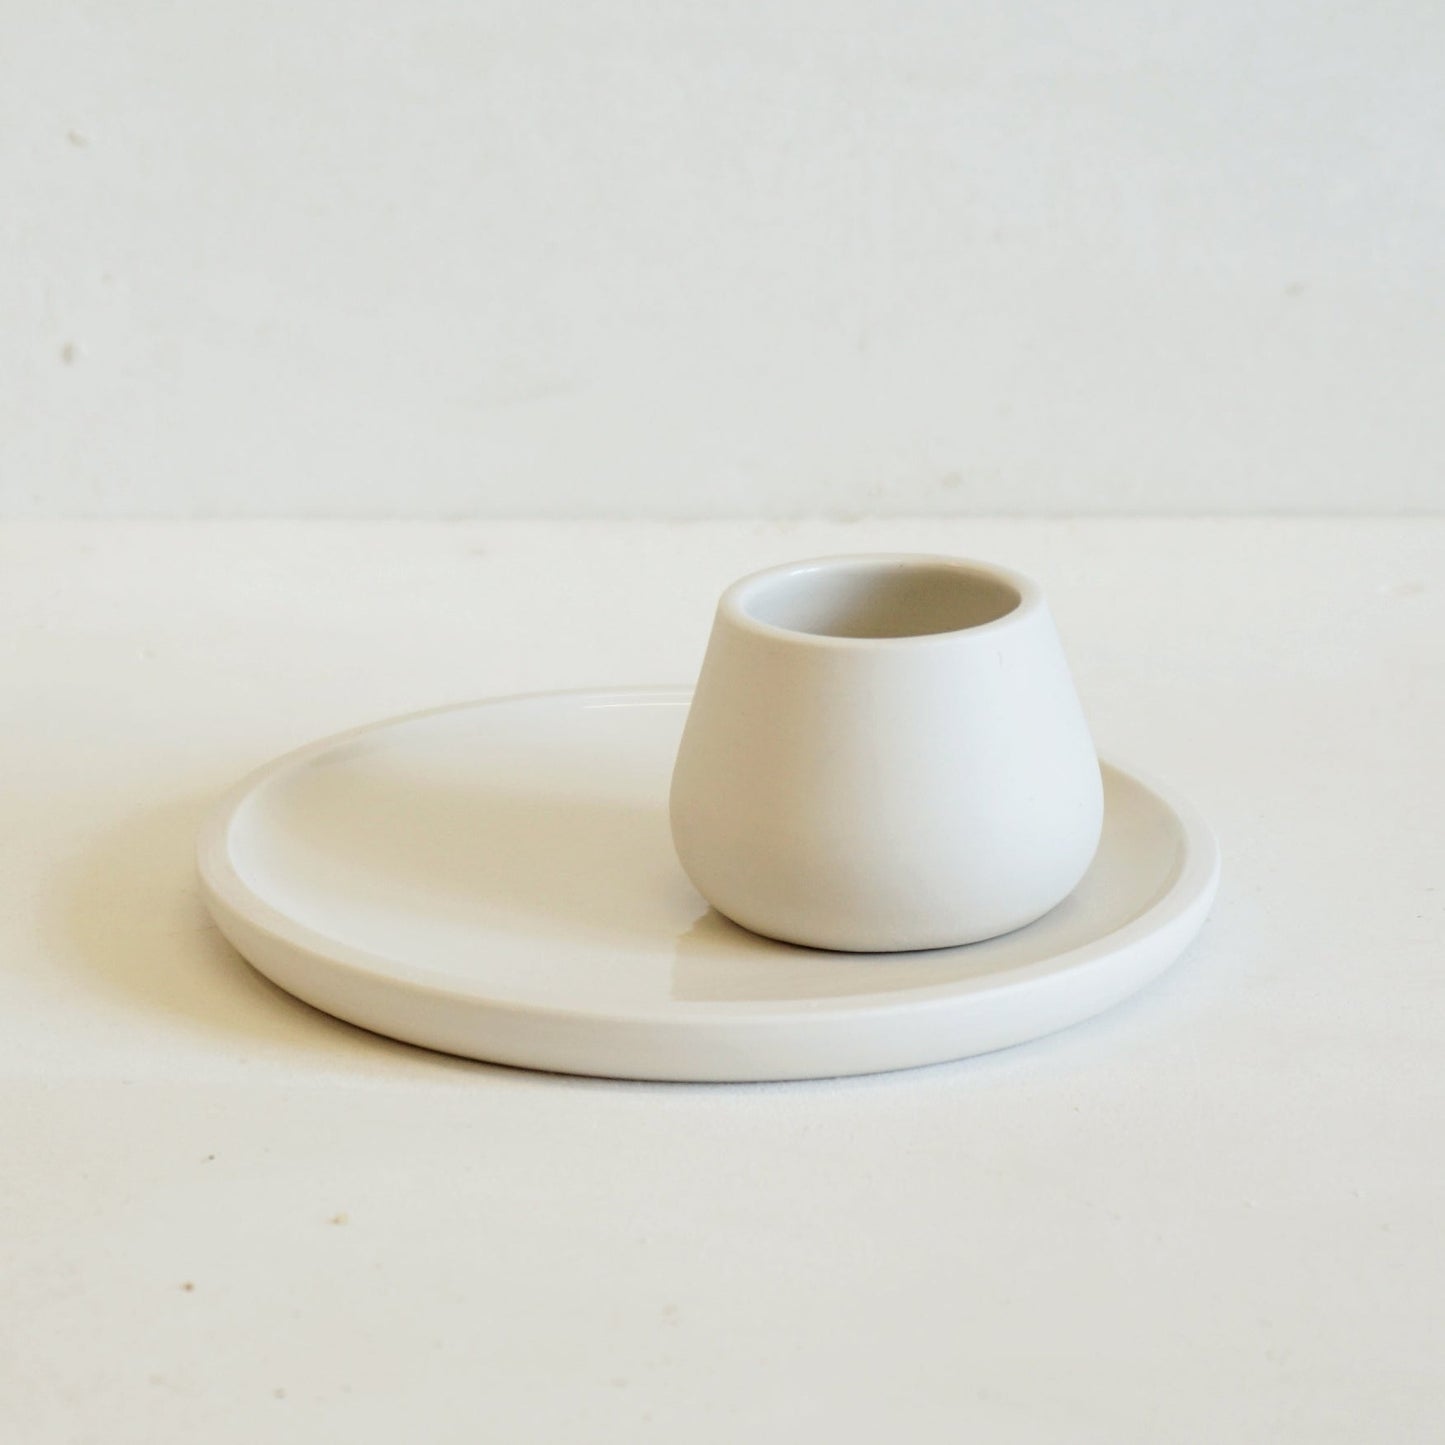 Simple Egg Cup Plate hand thrown in porcelain